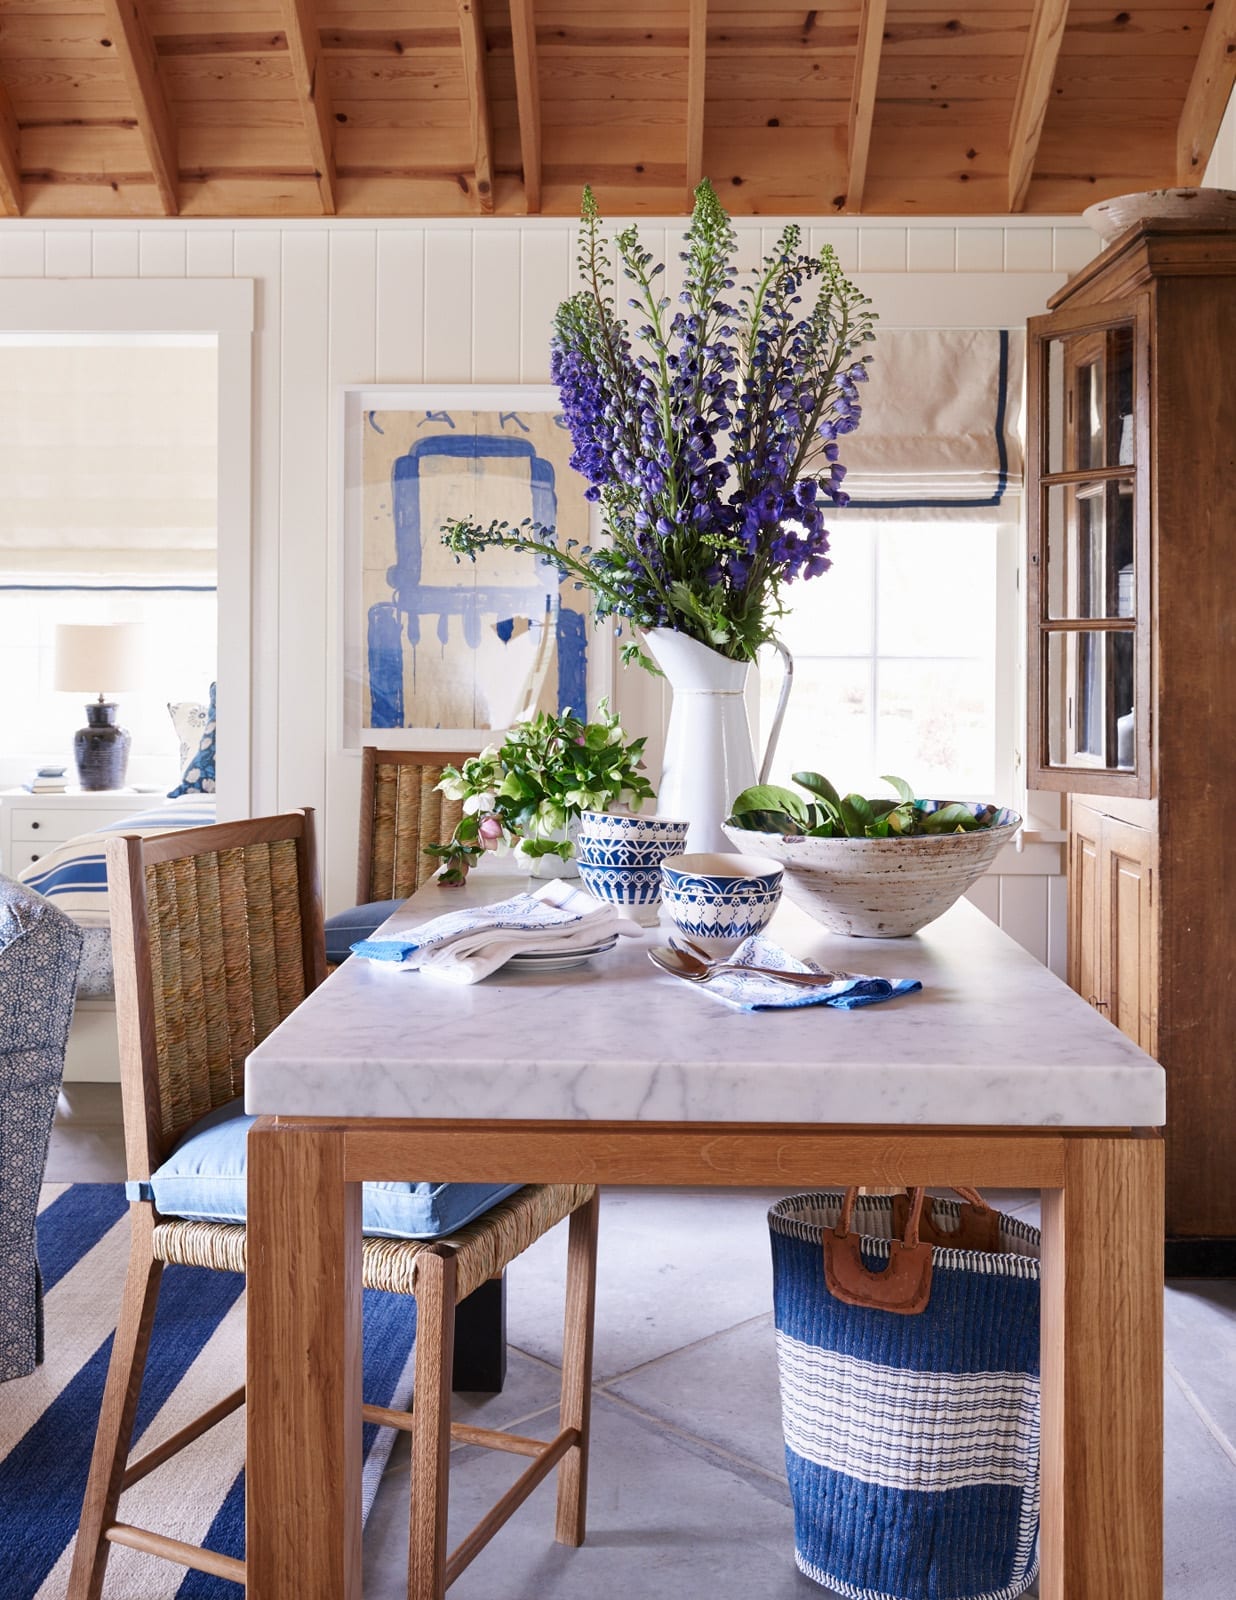 A blue and white kitchen presents a timeless and elegant color palette that's both calming and stylish and Mark D. Sikes demonstrates just that. - Amy Neunsinger Photography